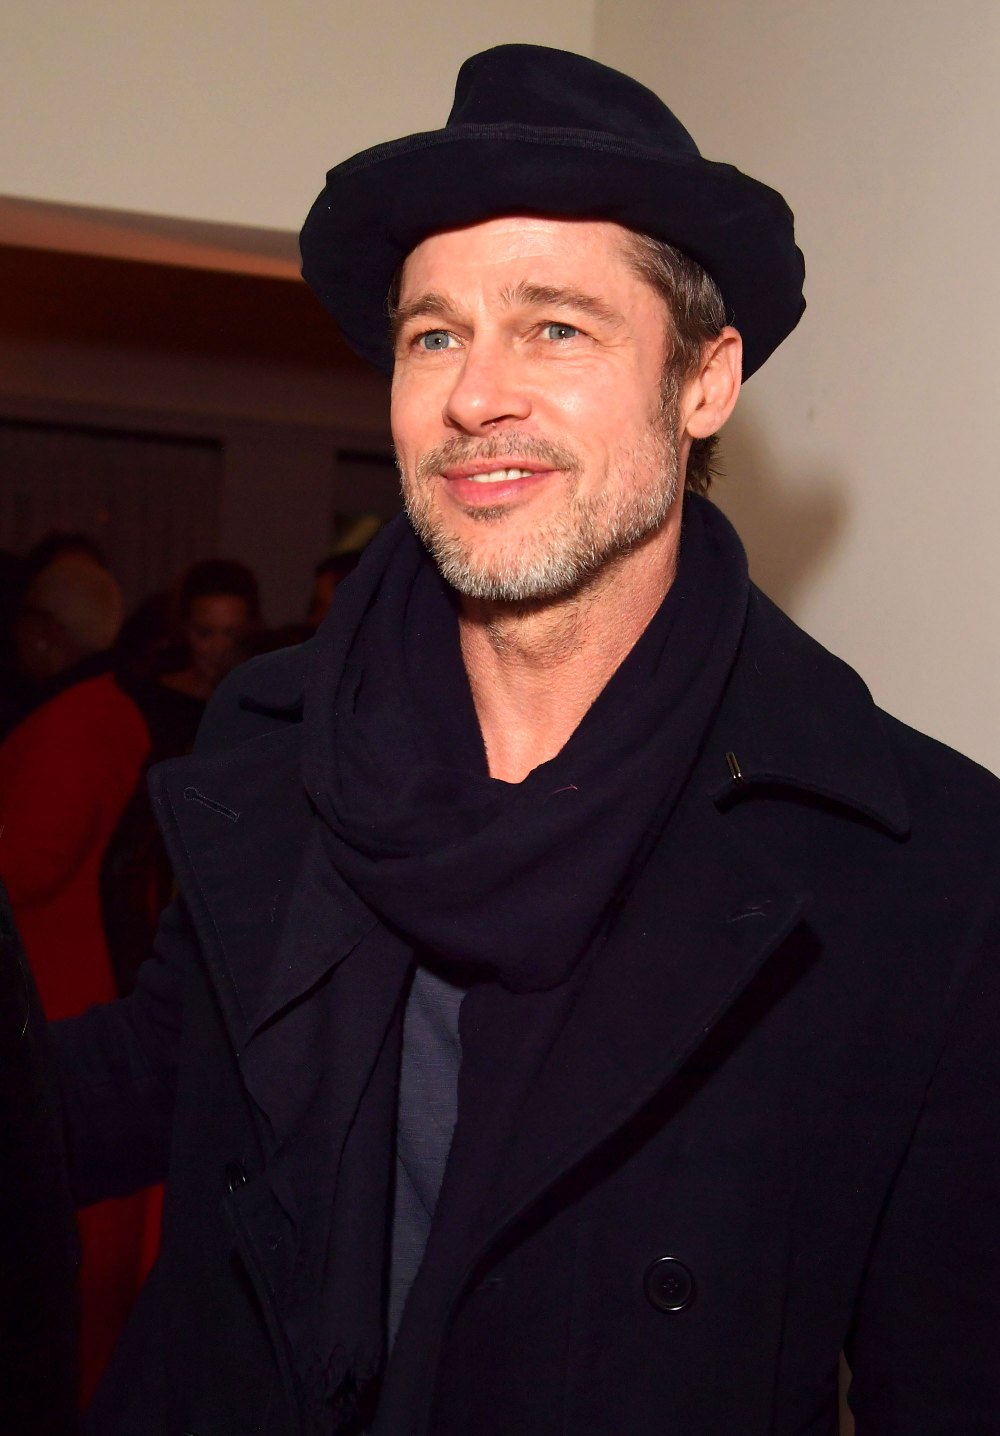 Brad Pitt Rallies Support at LACMA Hearing in Los Angeles